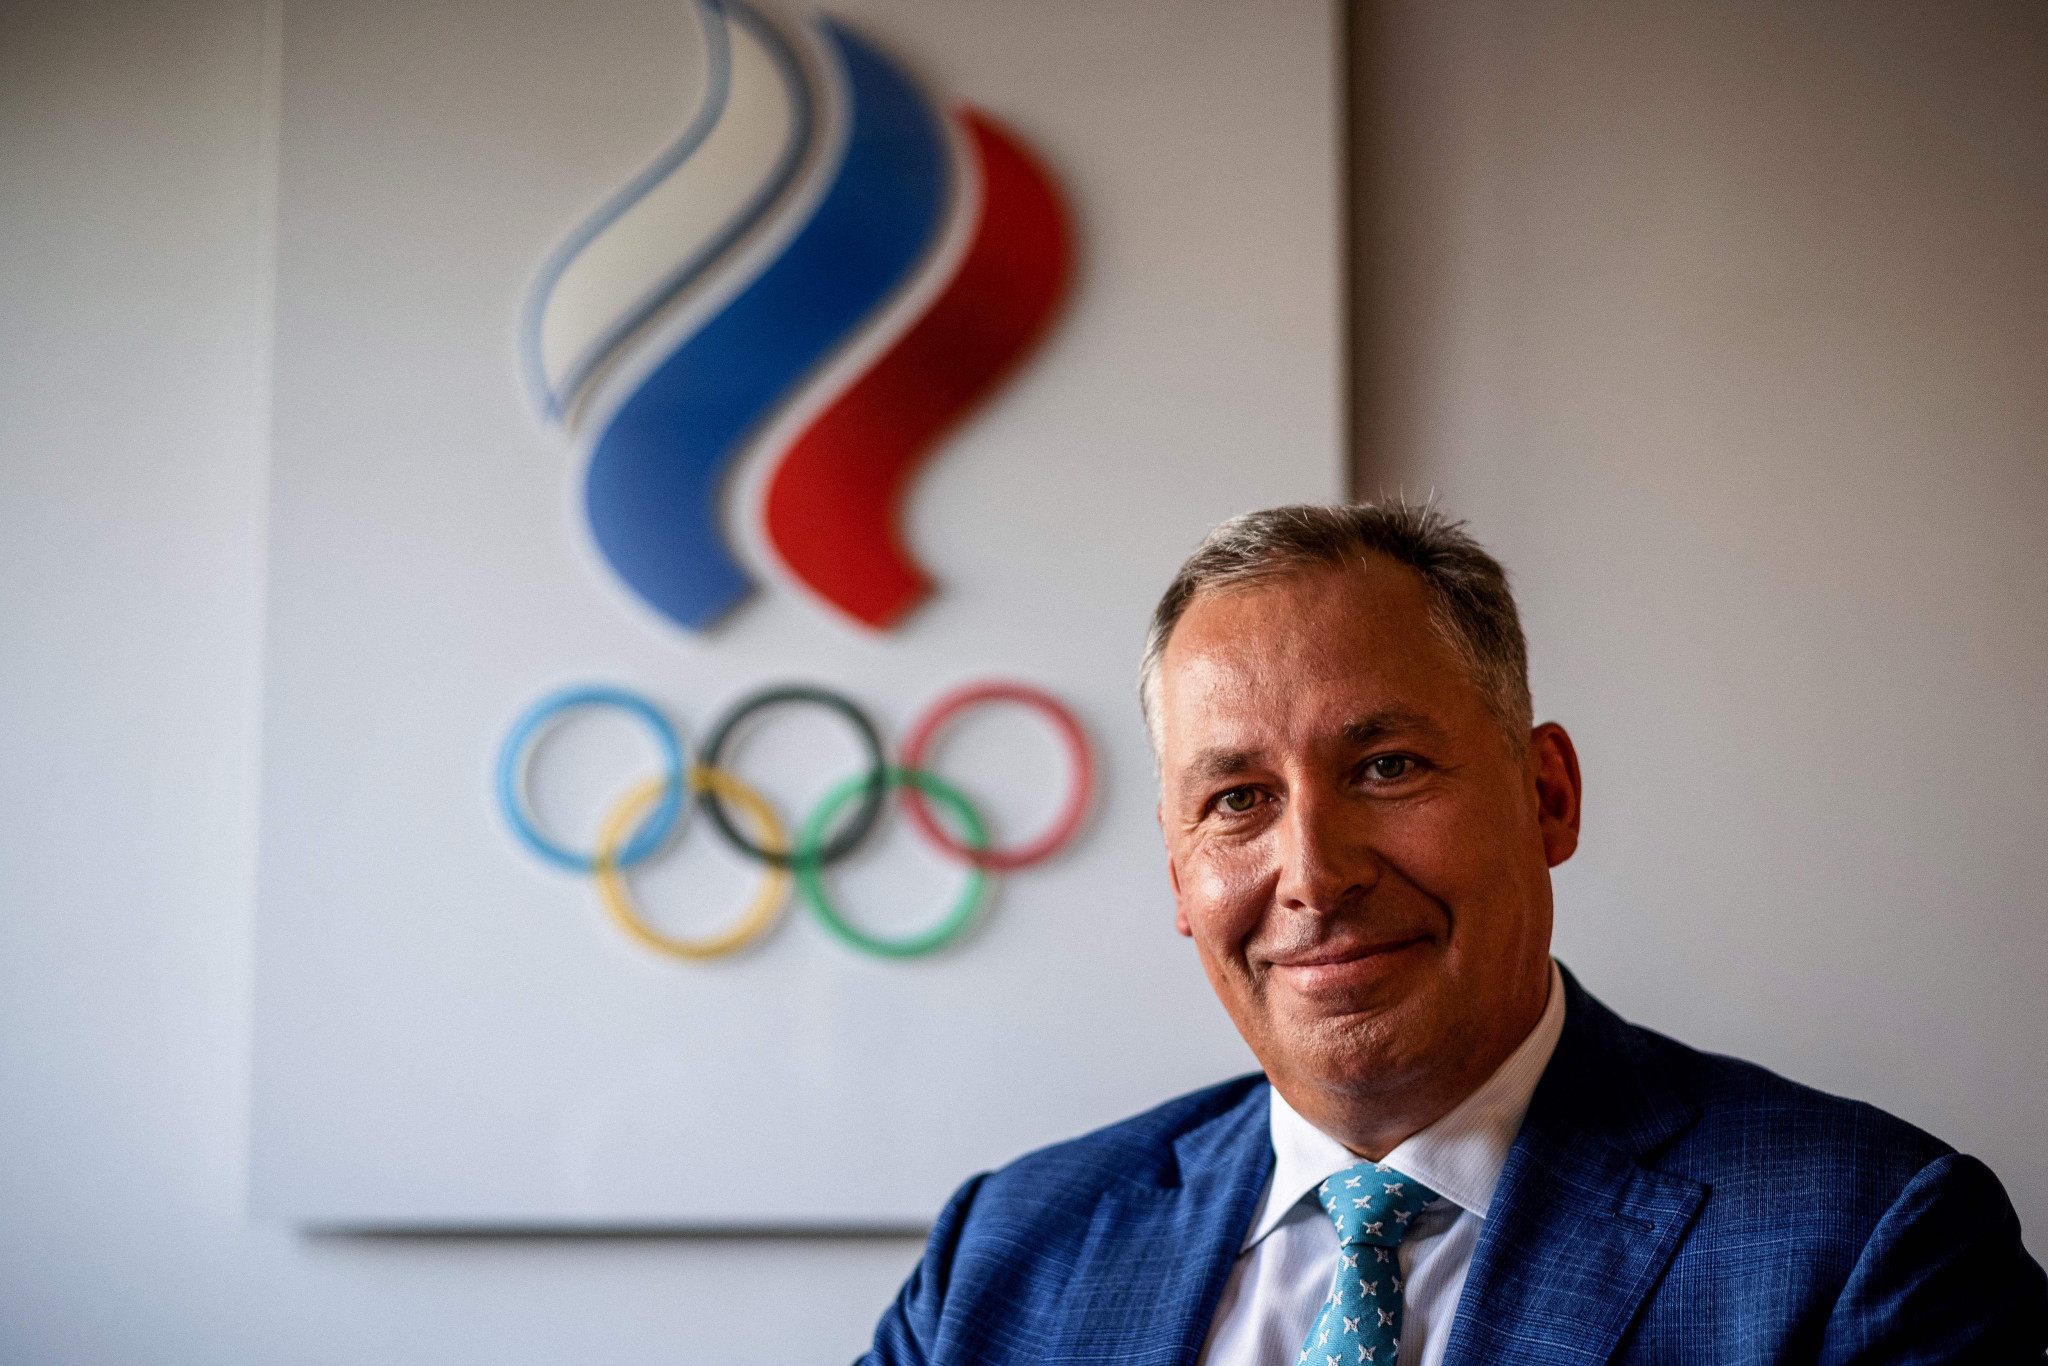 Pozdnyakov nominated for re-election as Russian Olympic Committee President